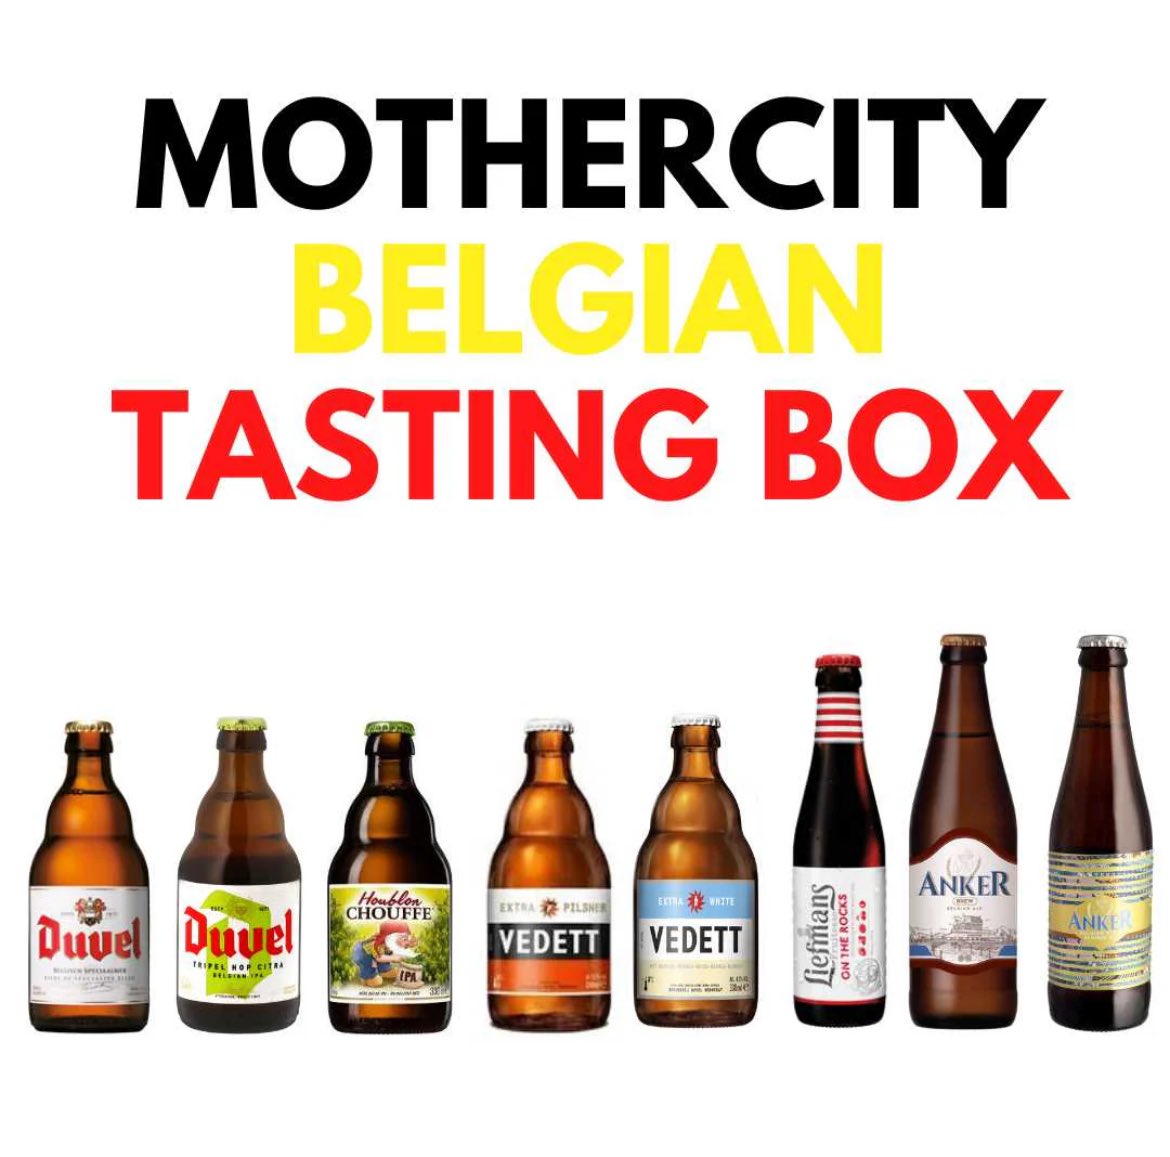 Time for some beer shopping? Load that online shopping cart 🛒 with The Belgian Tasting Box from @Mothercity_liq #belgianBeer mothercityliquor.co.za/products/belgi…